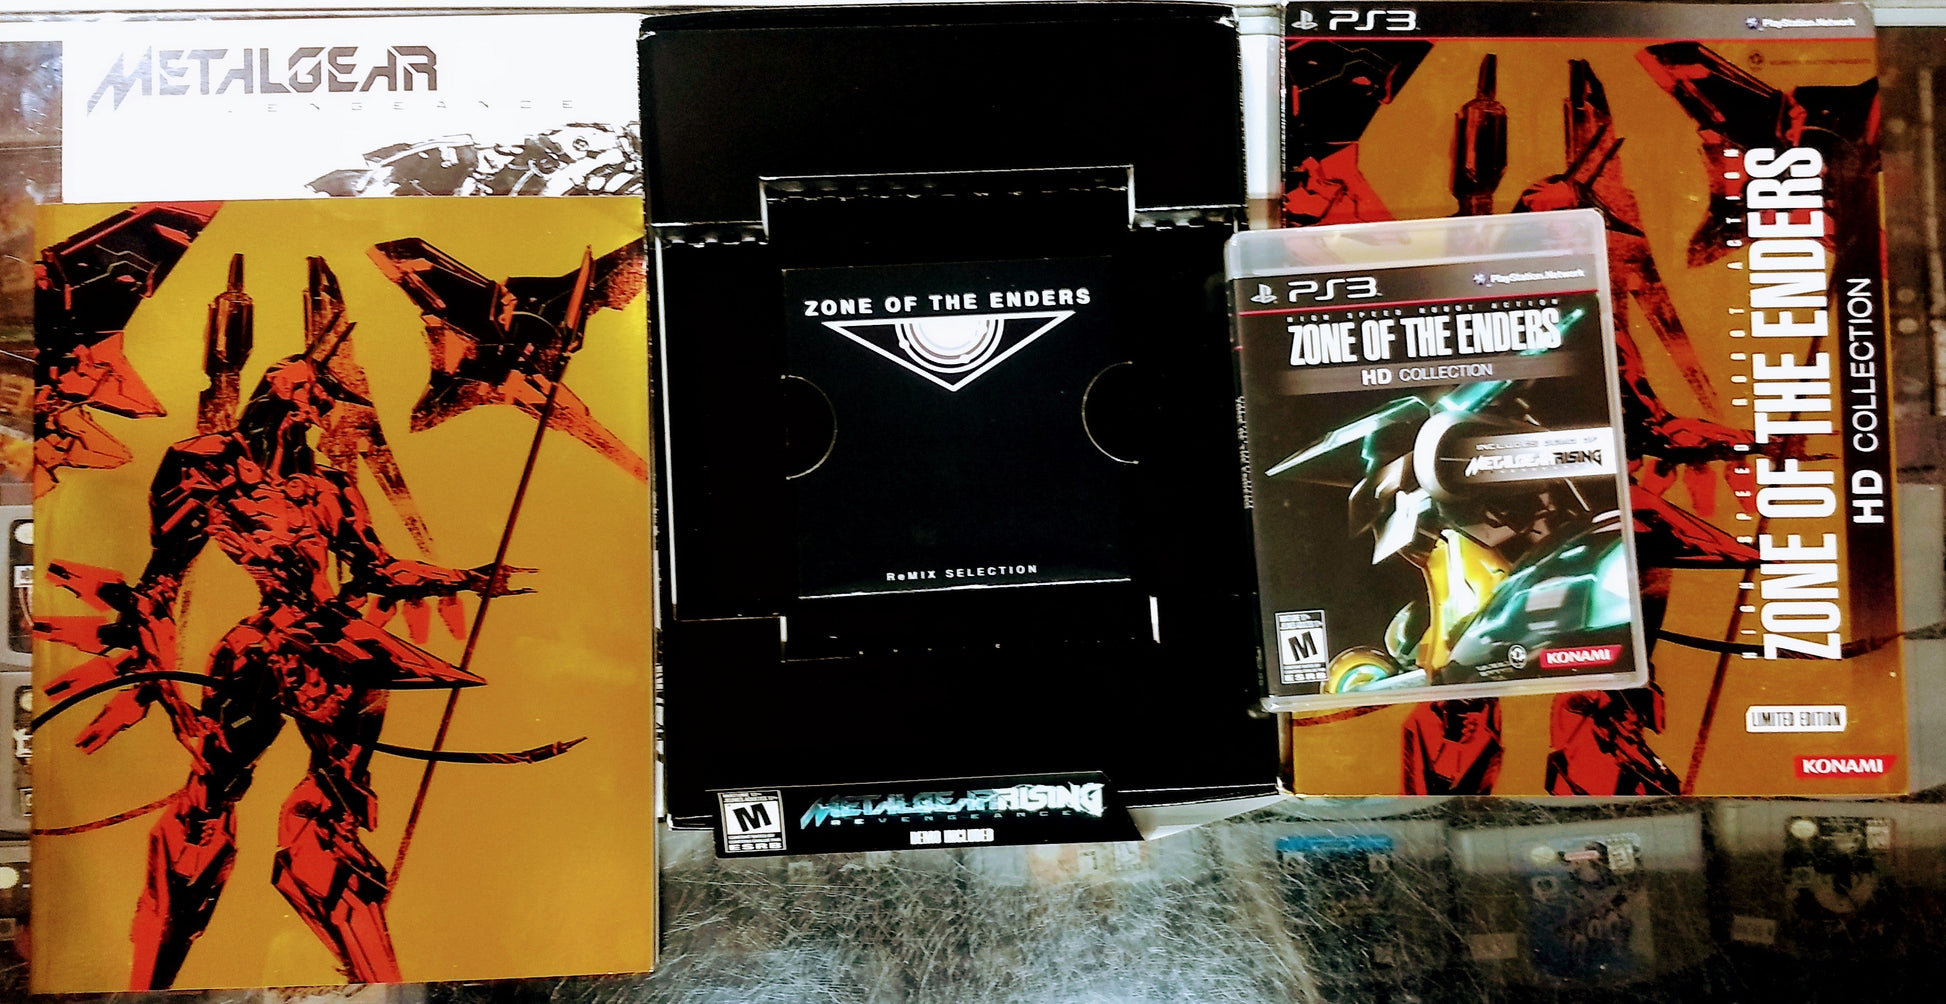 ZONE OF THE ENDERS HD COLLECTION LIMITED EDITION (PLAYSTATION 3 PS3) - jeux video game-x